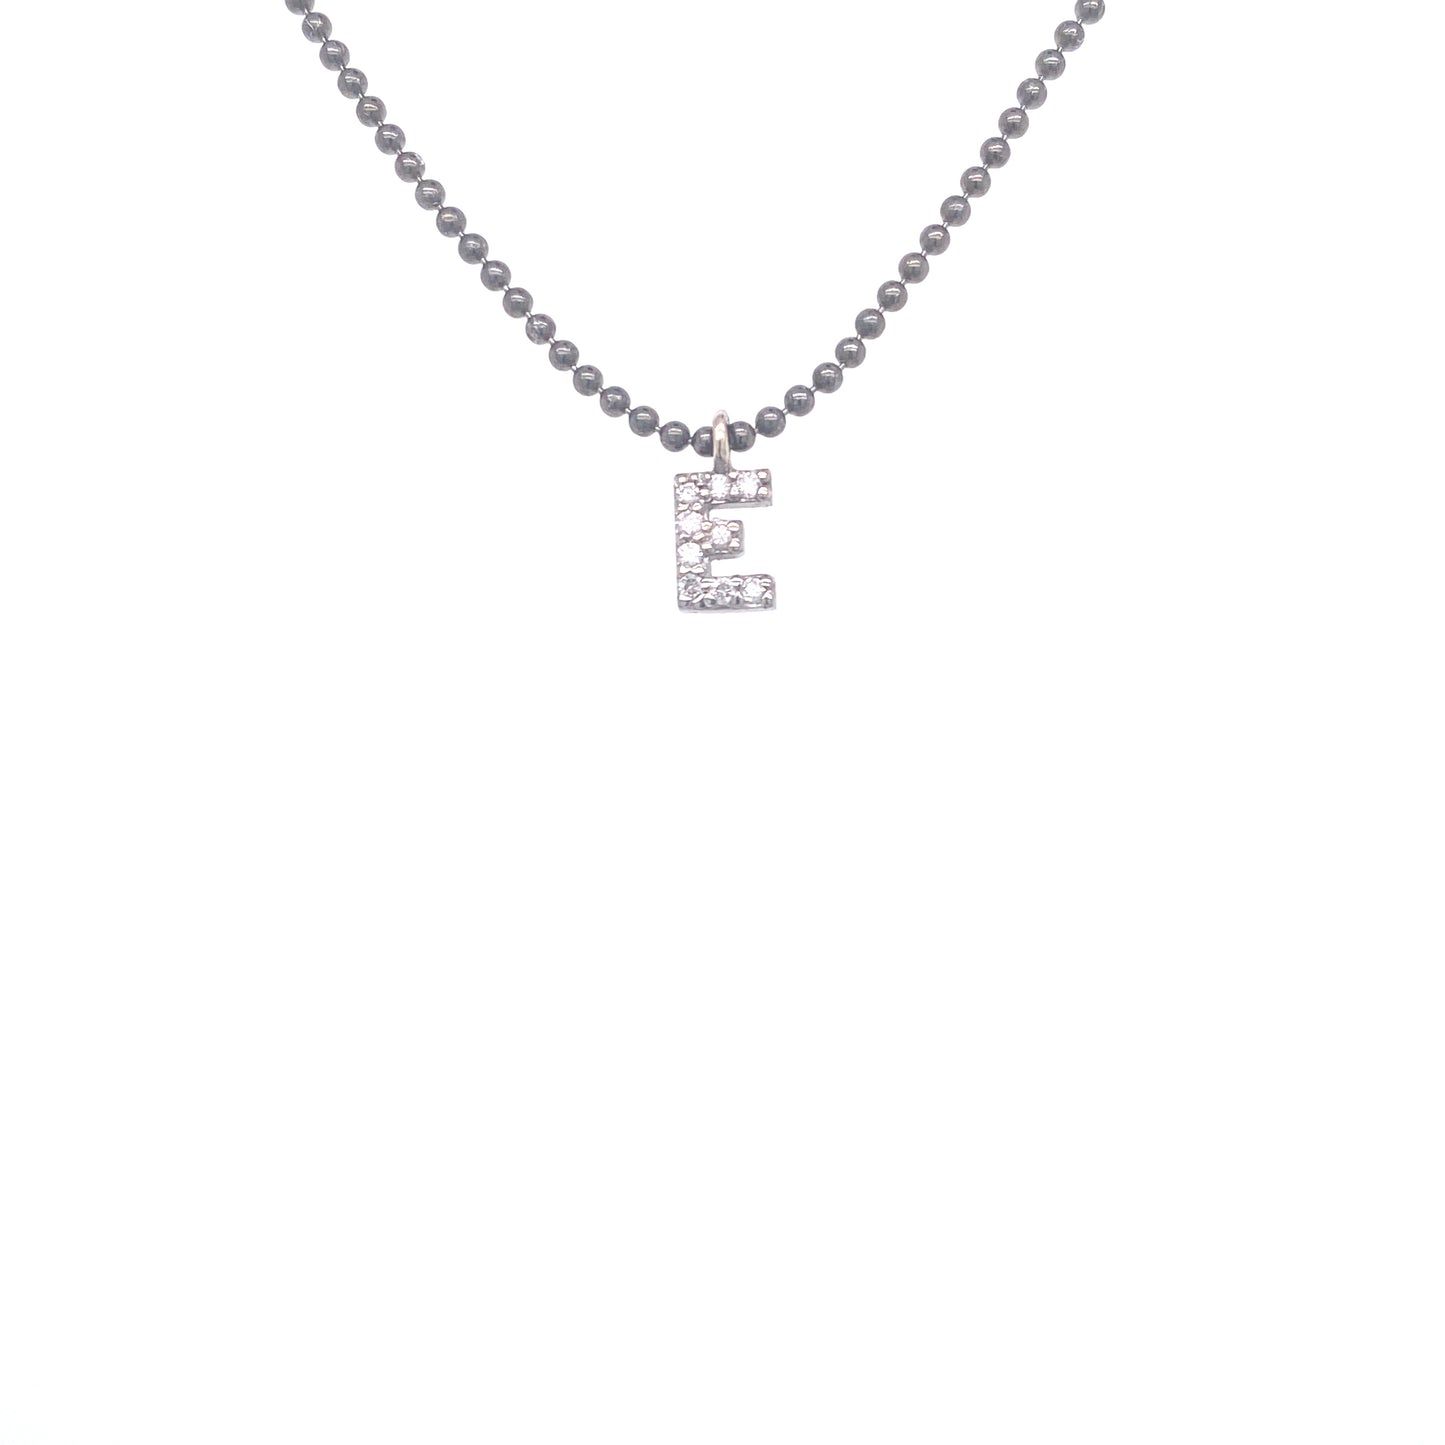 Necklace With Small Initial E and Diamond | Bernat Rubi | Luby 